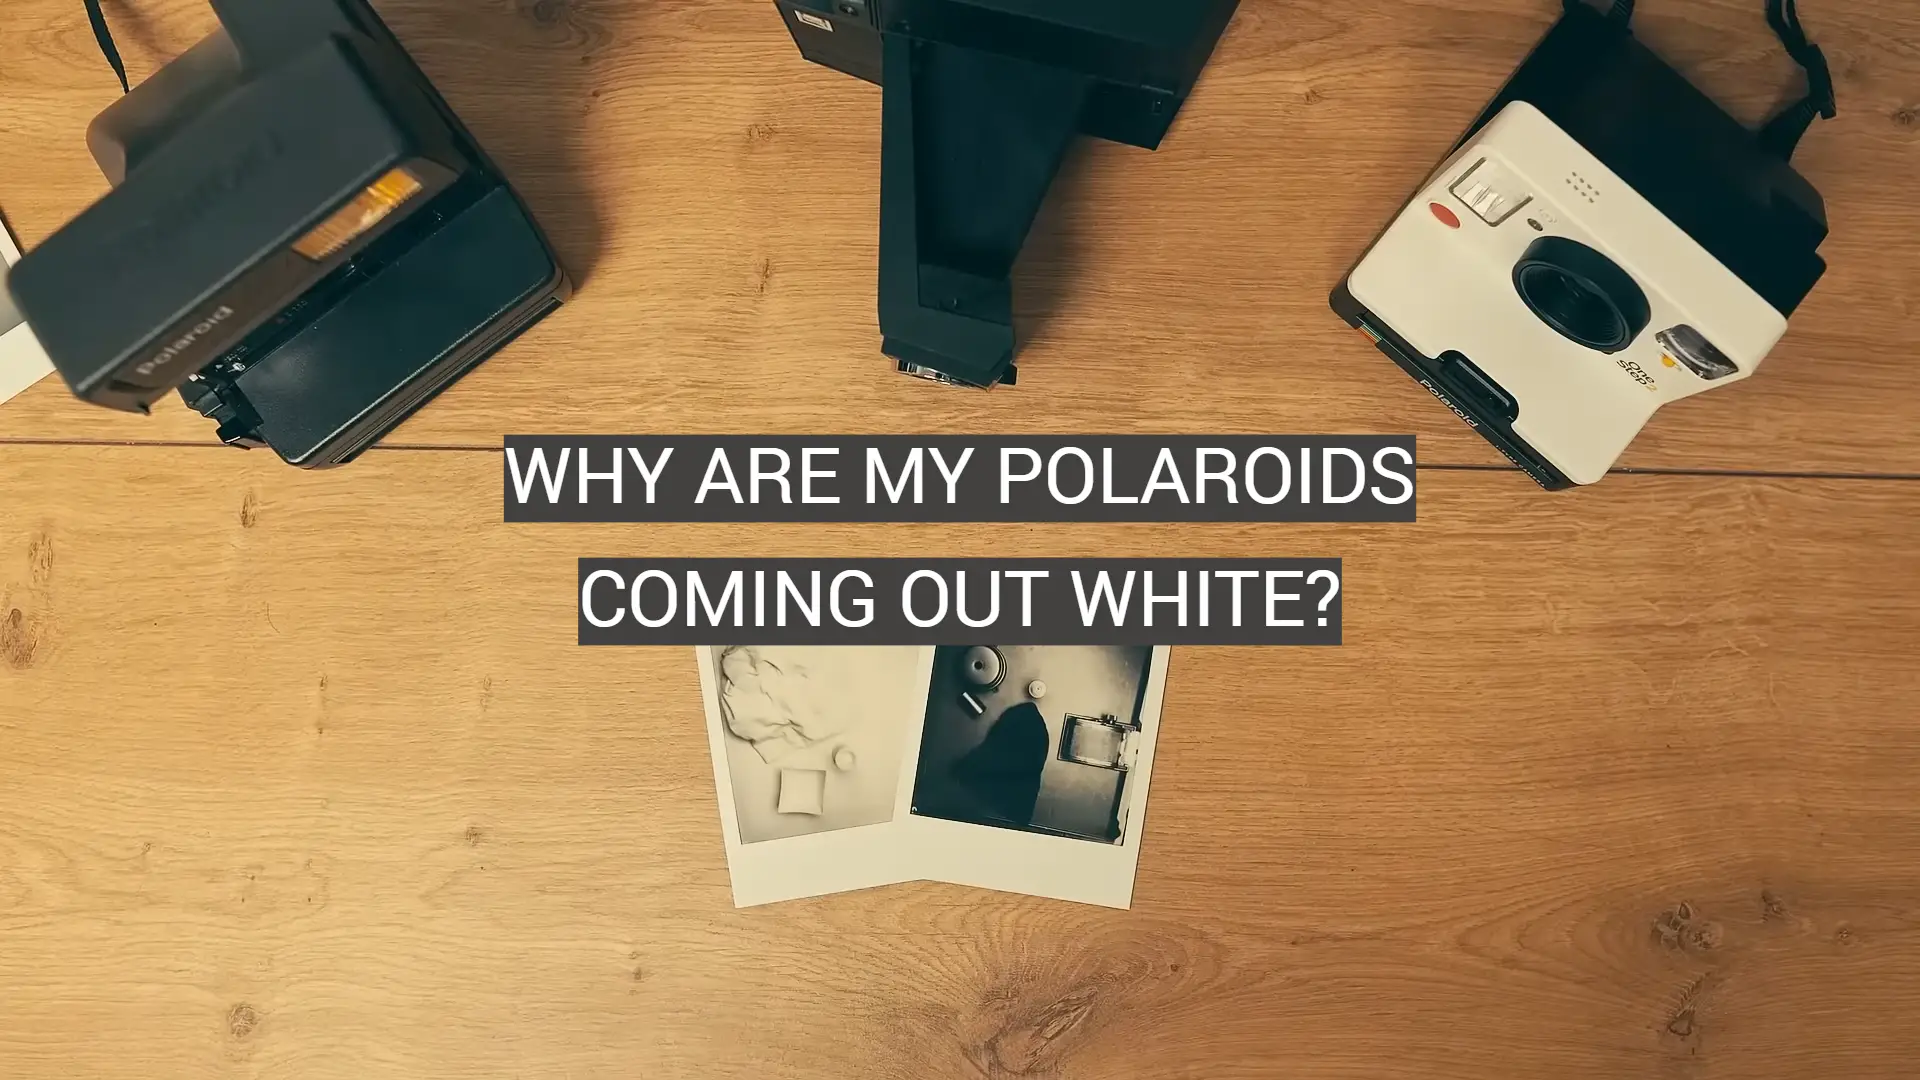 Why Are My Polaroids Coming Out White?